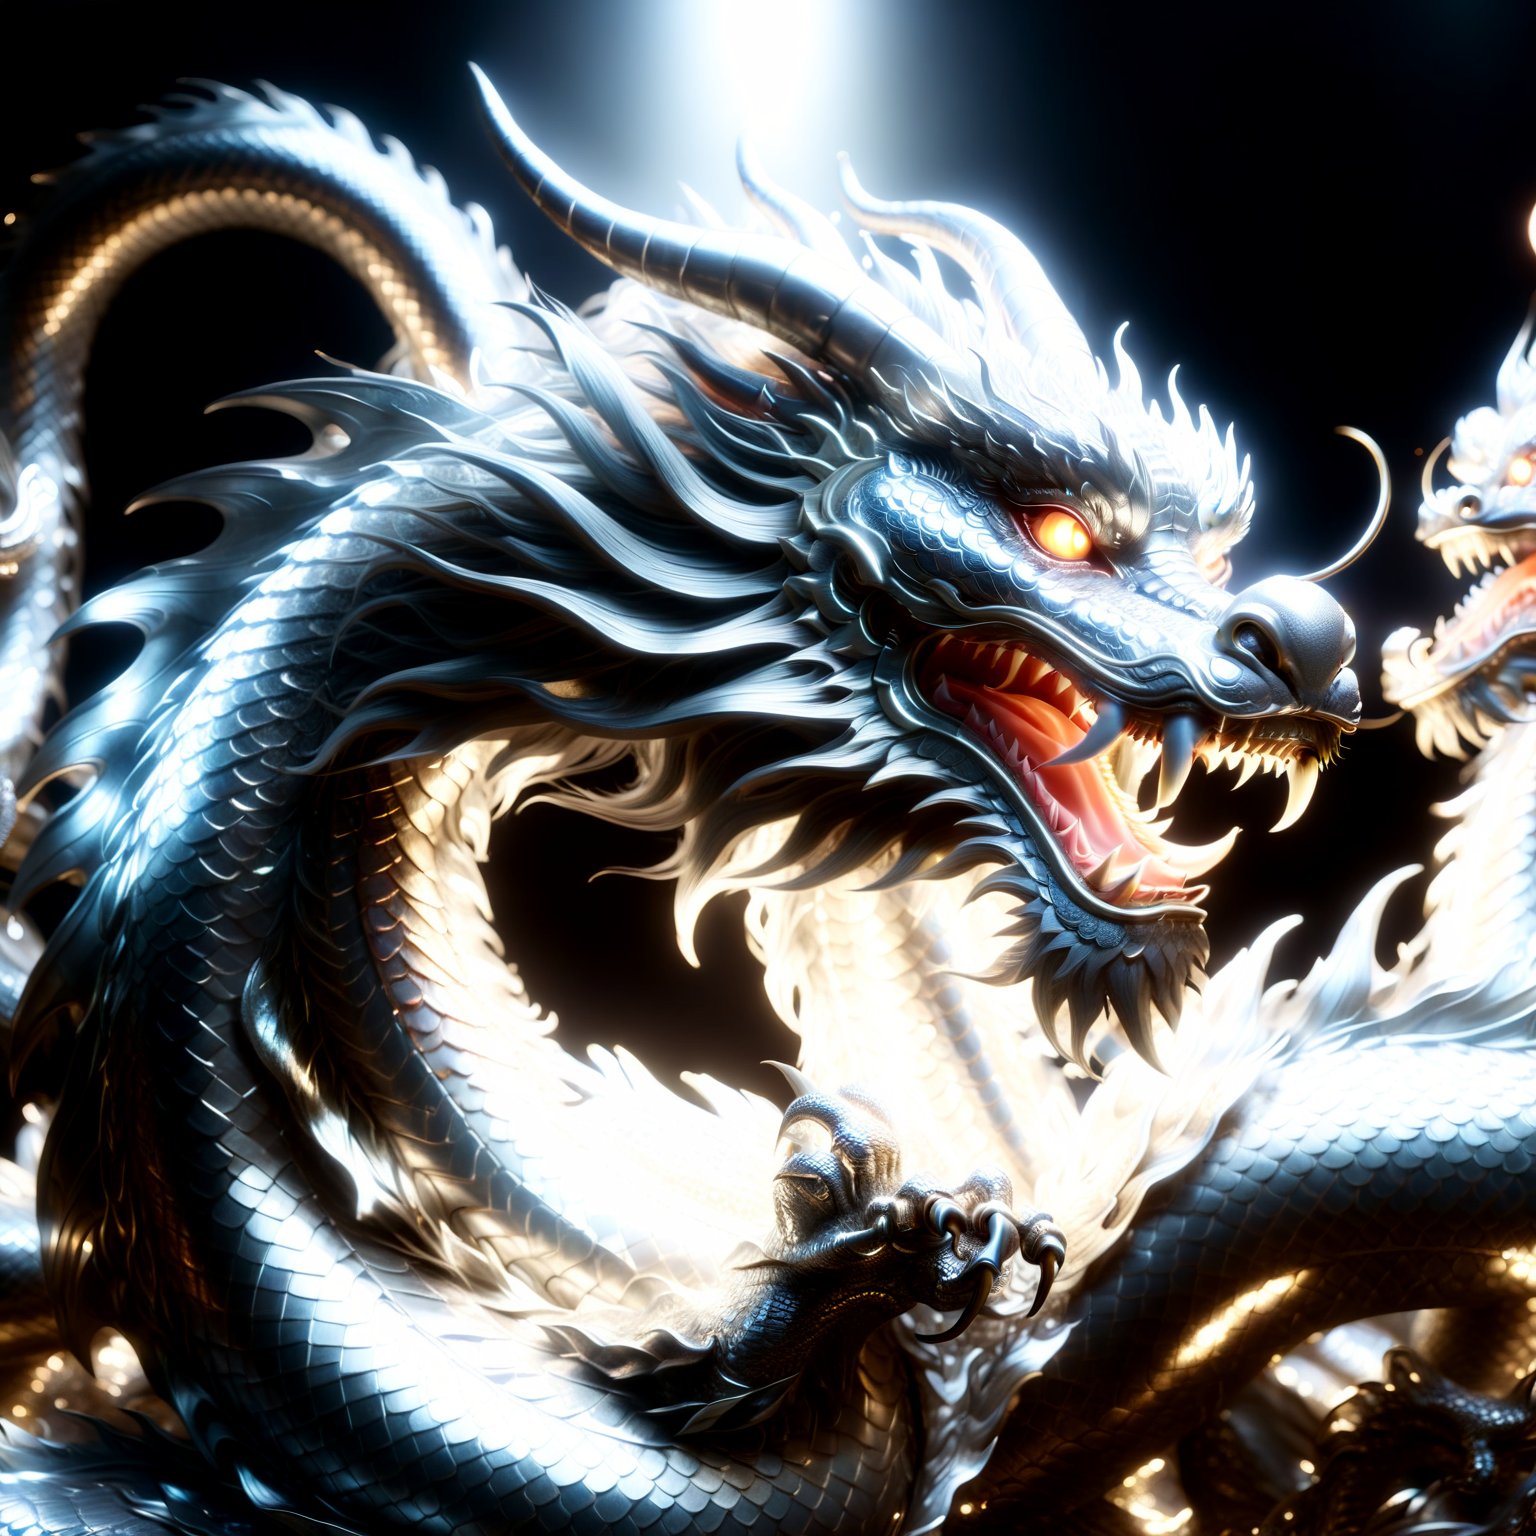 Chinese dragon made entirely of platinum, shimmering and glowing, intricate platinum texture, majestic and elegant, radiant silver hues, sparkling with light, by FuturEvoLab, (masterpiece: 2), best quality, ultra highres, original, extremely detailed, perfect lighting, fantasy theme, regal aura,Katon